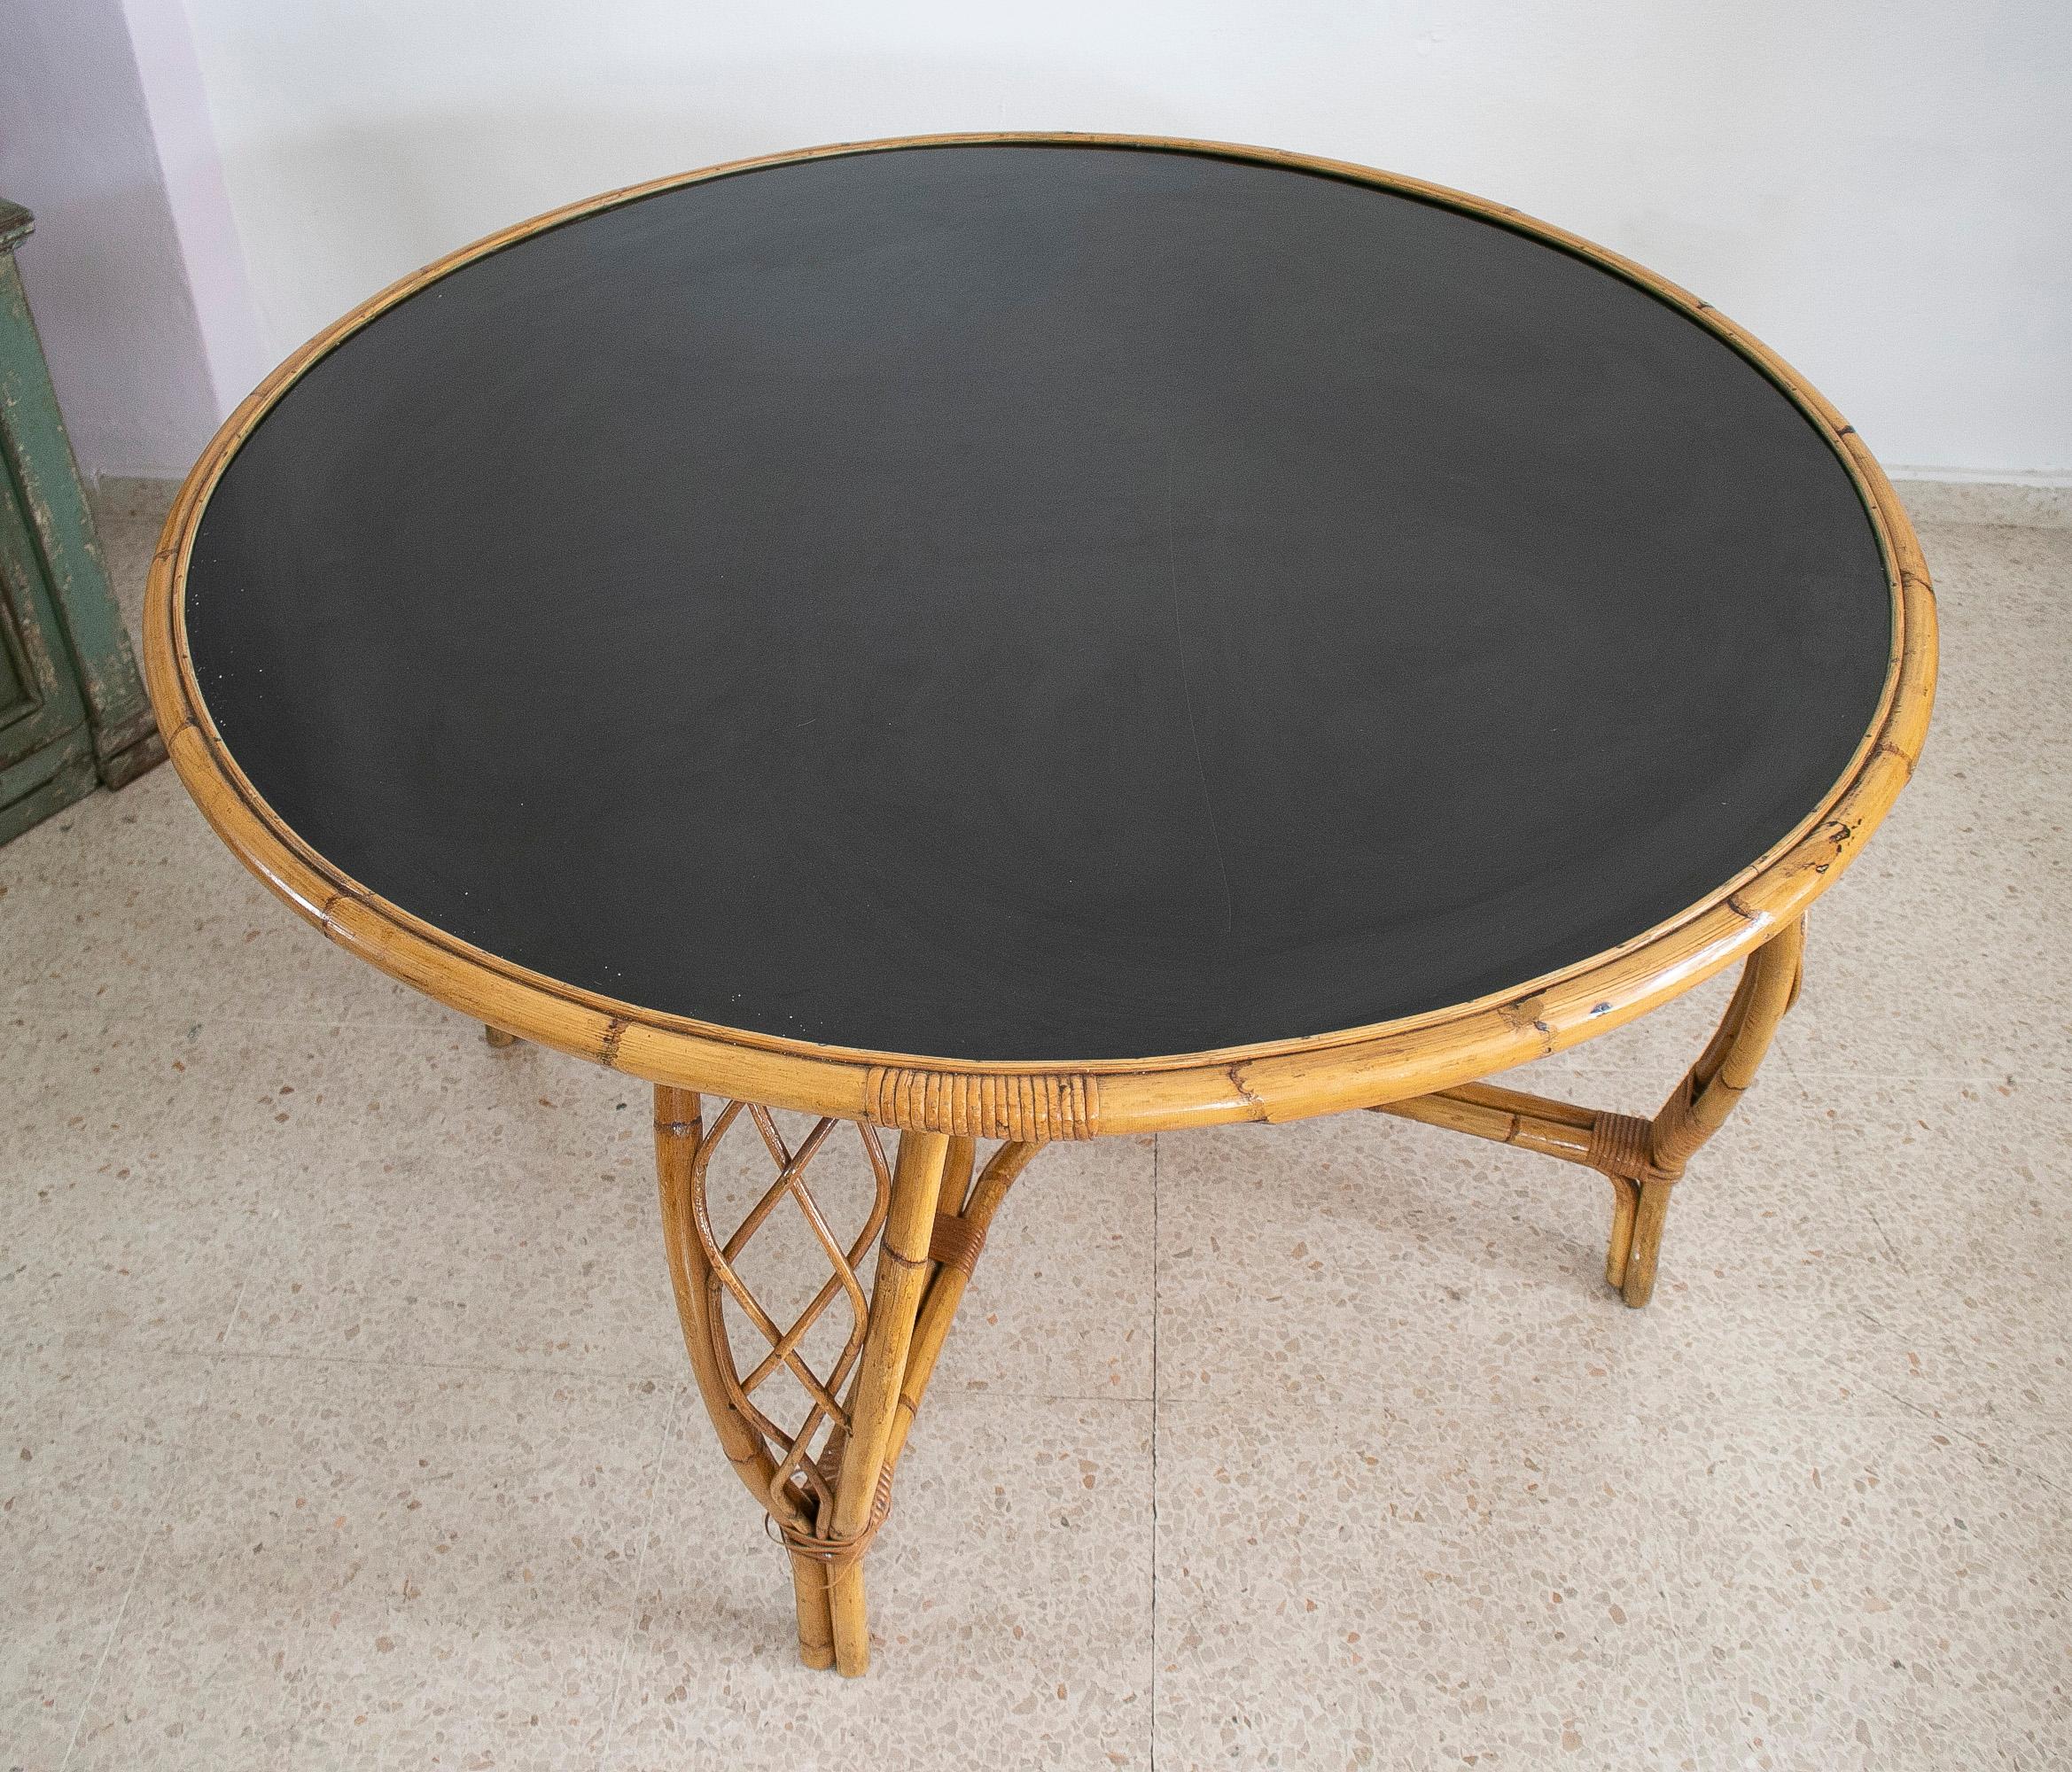 1970s Spanish Round Bamboo Table w/ Black Formica Top For Sale 2